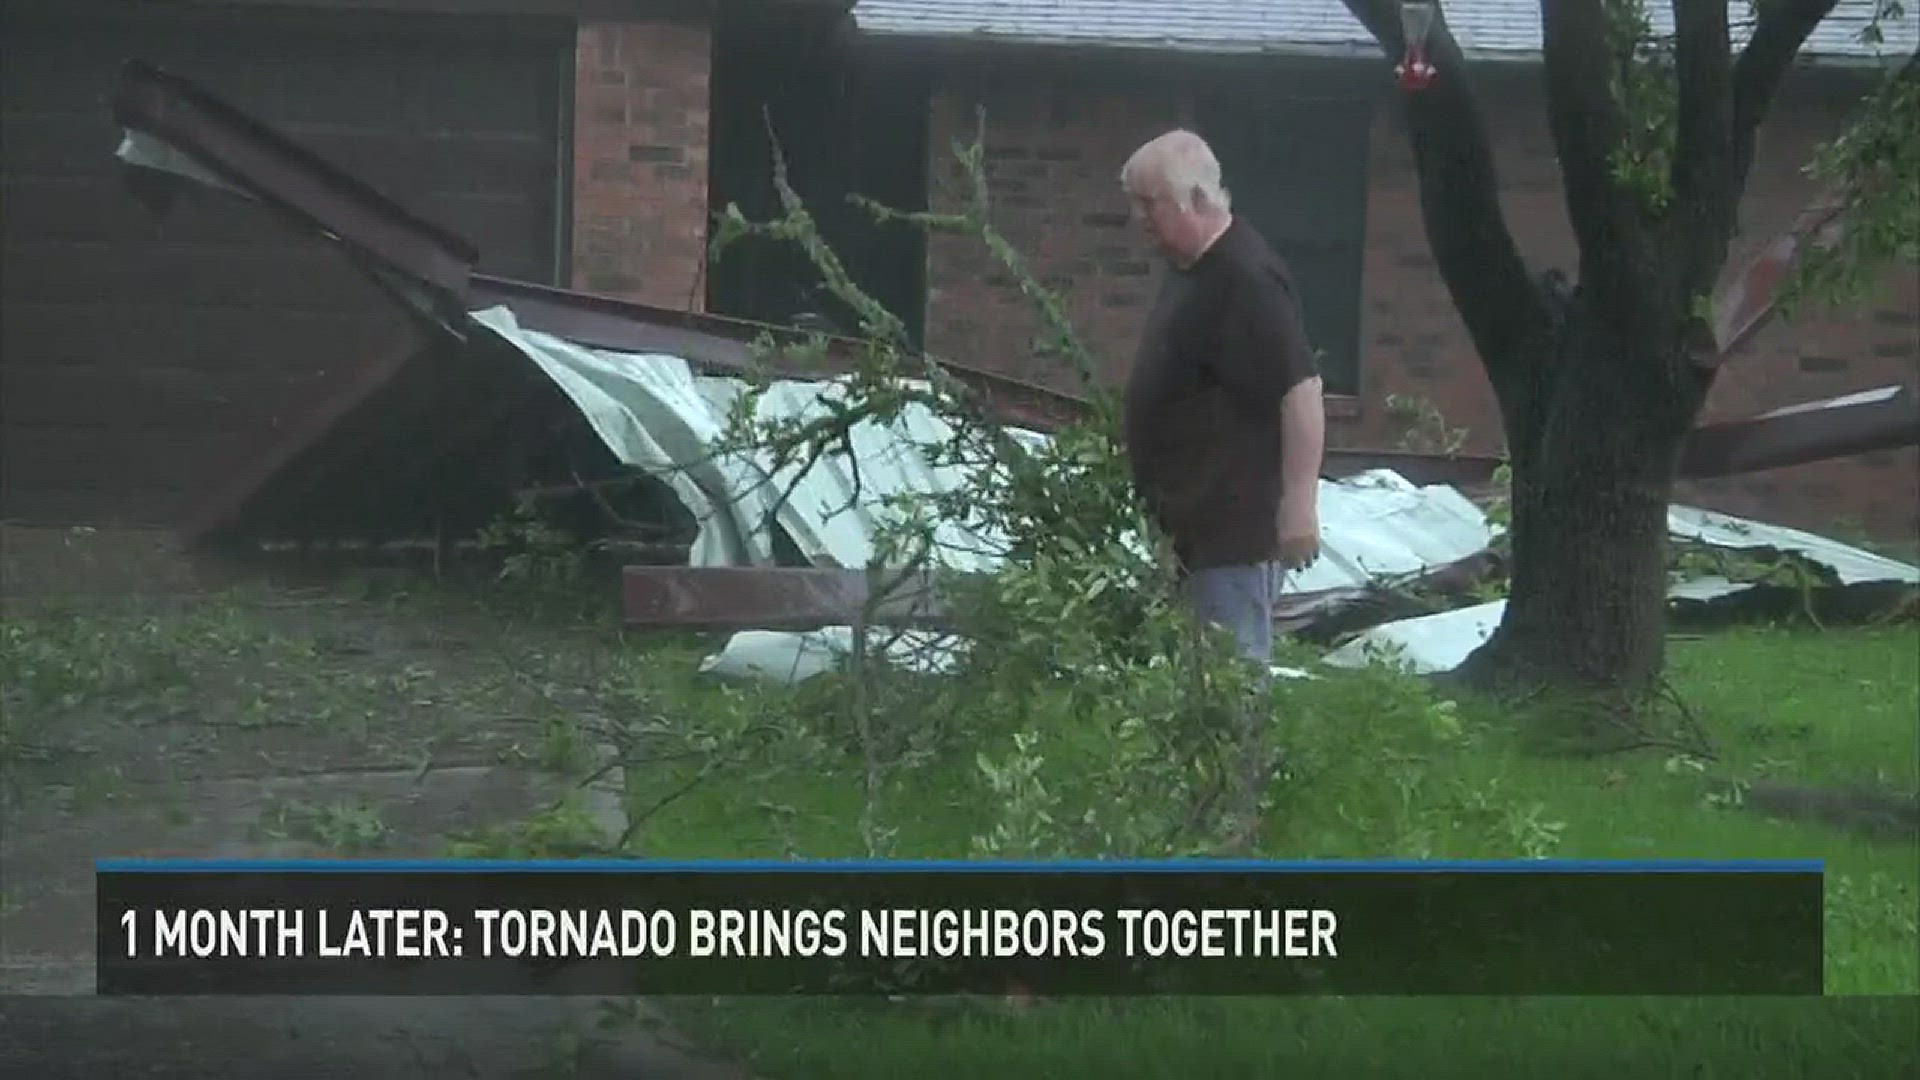 Ian Smith visits the Bryan neighborhood hit by a tornado last month to see how residents are recovering.